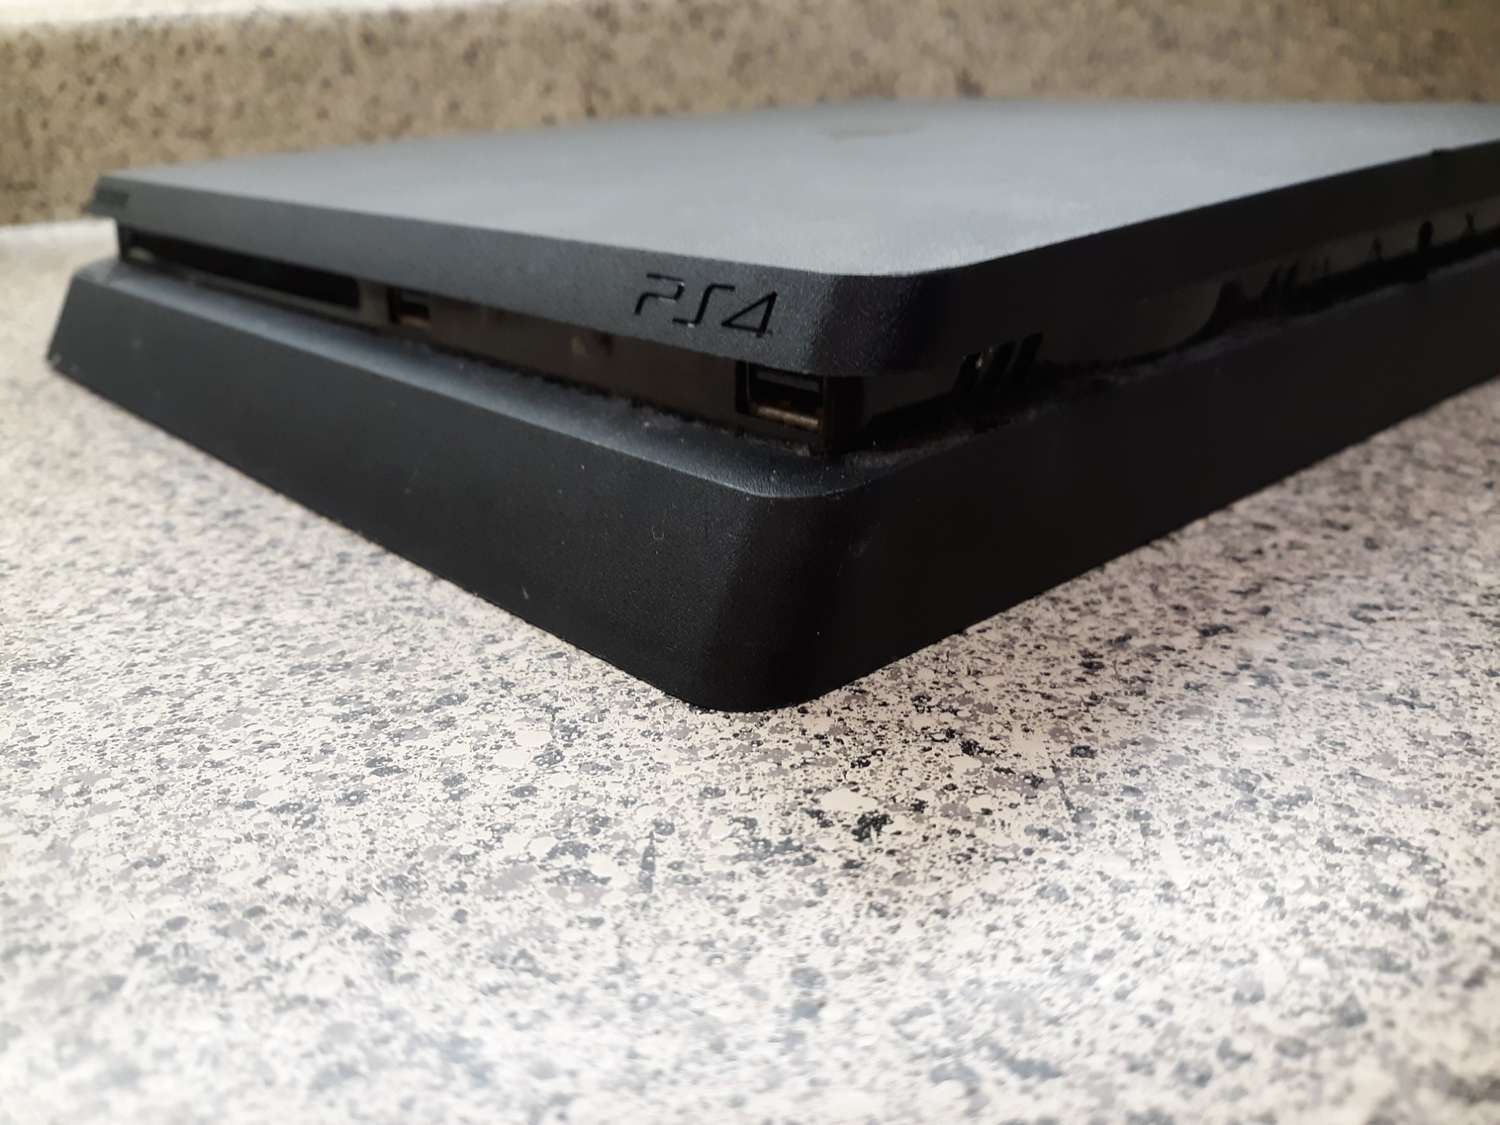 Black PS4 on a marble counter